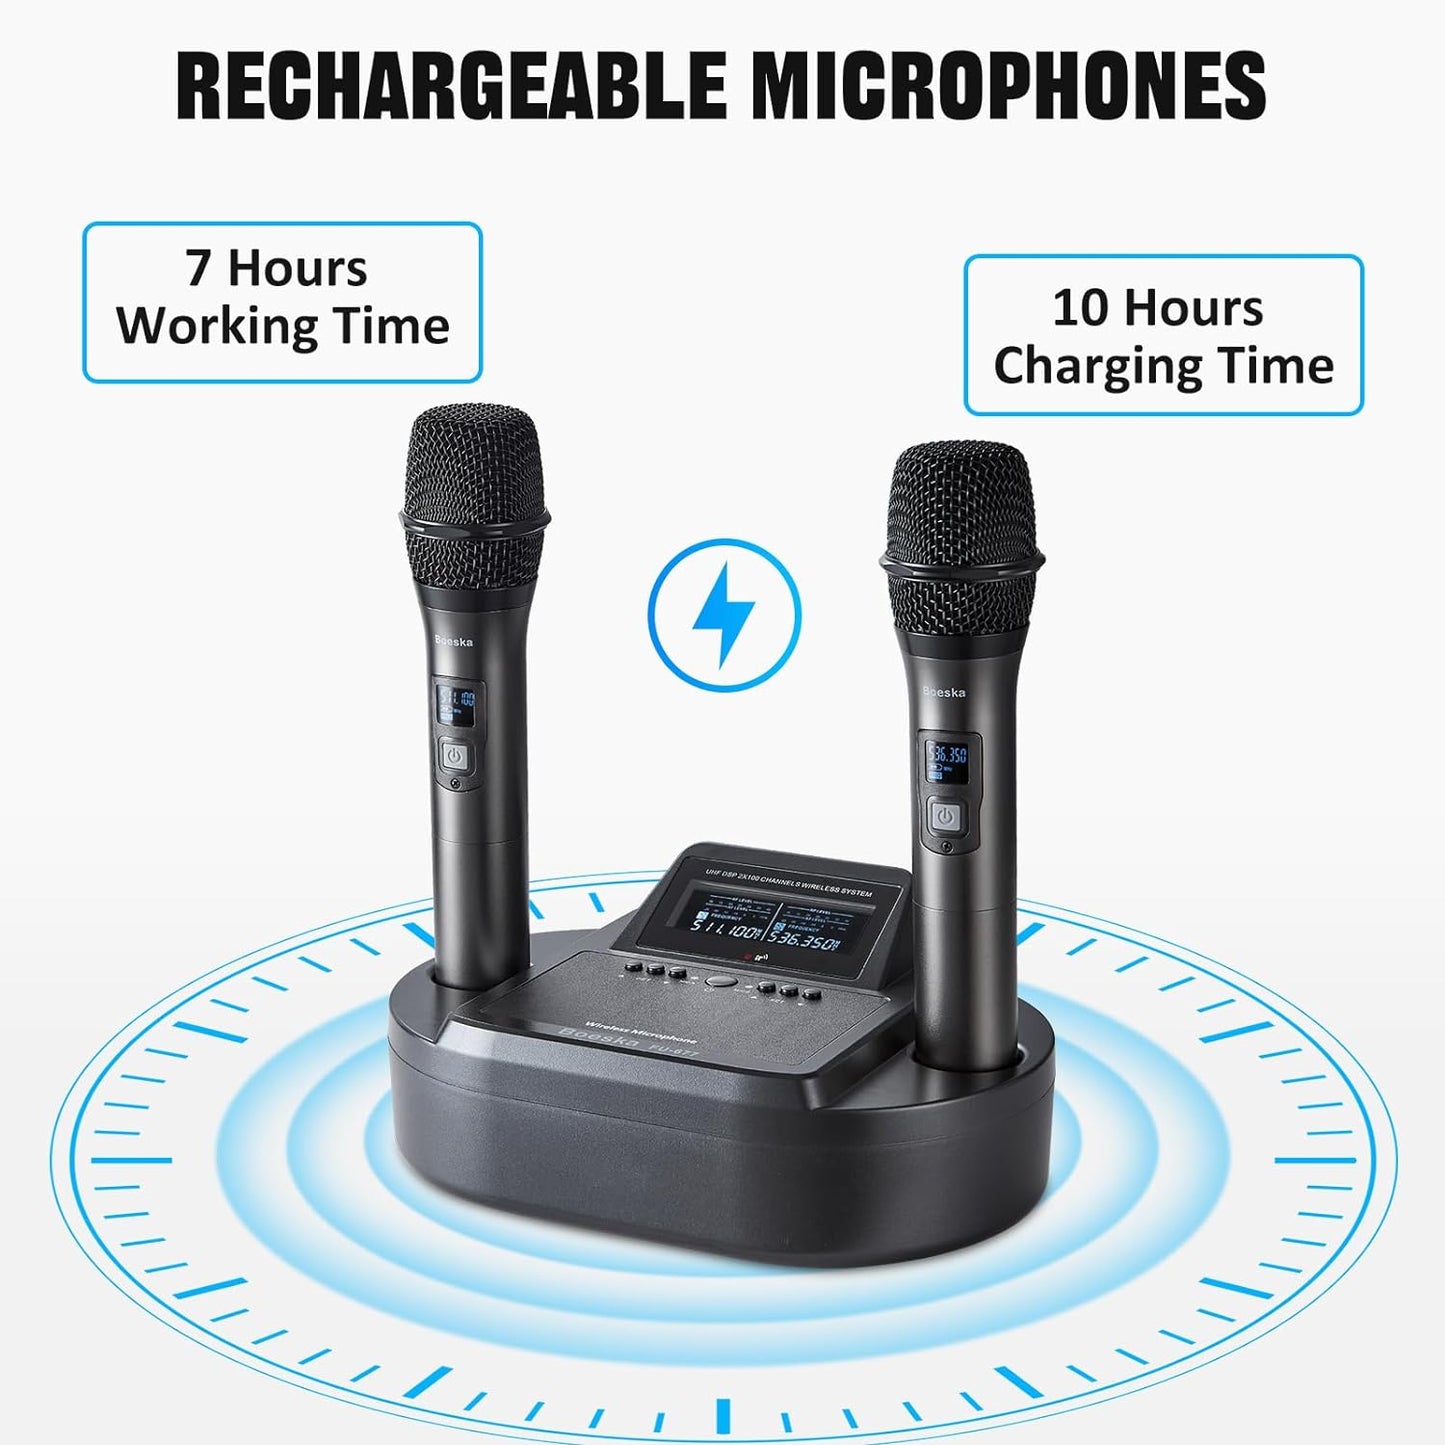 Boeska Rechargeable Handheld Wireless Microphone System UHF Dual Professional Cordless Mic for Home Karaoke, Meeting, Party, Conference, Stage